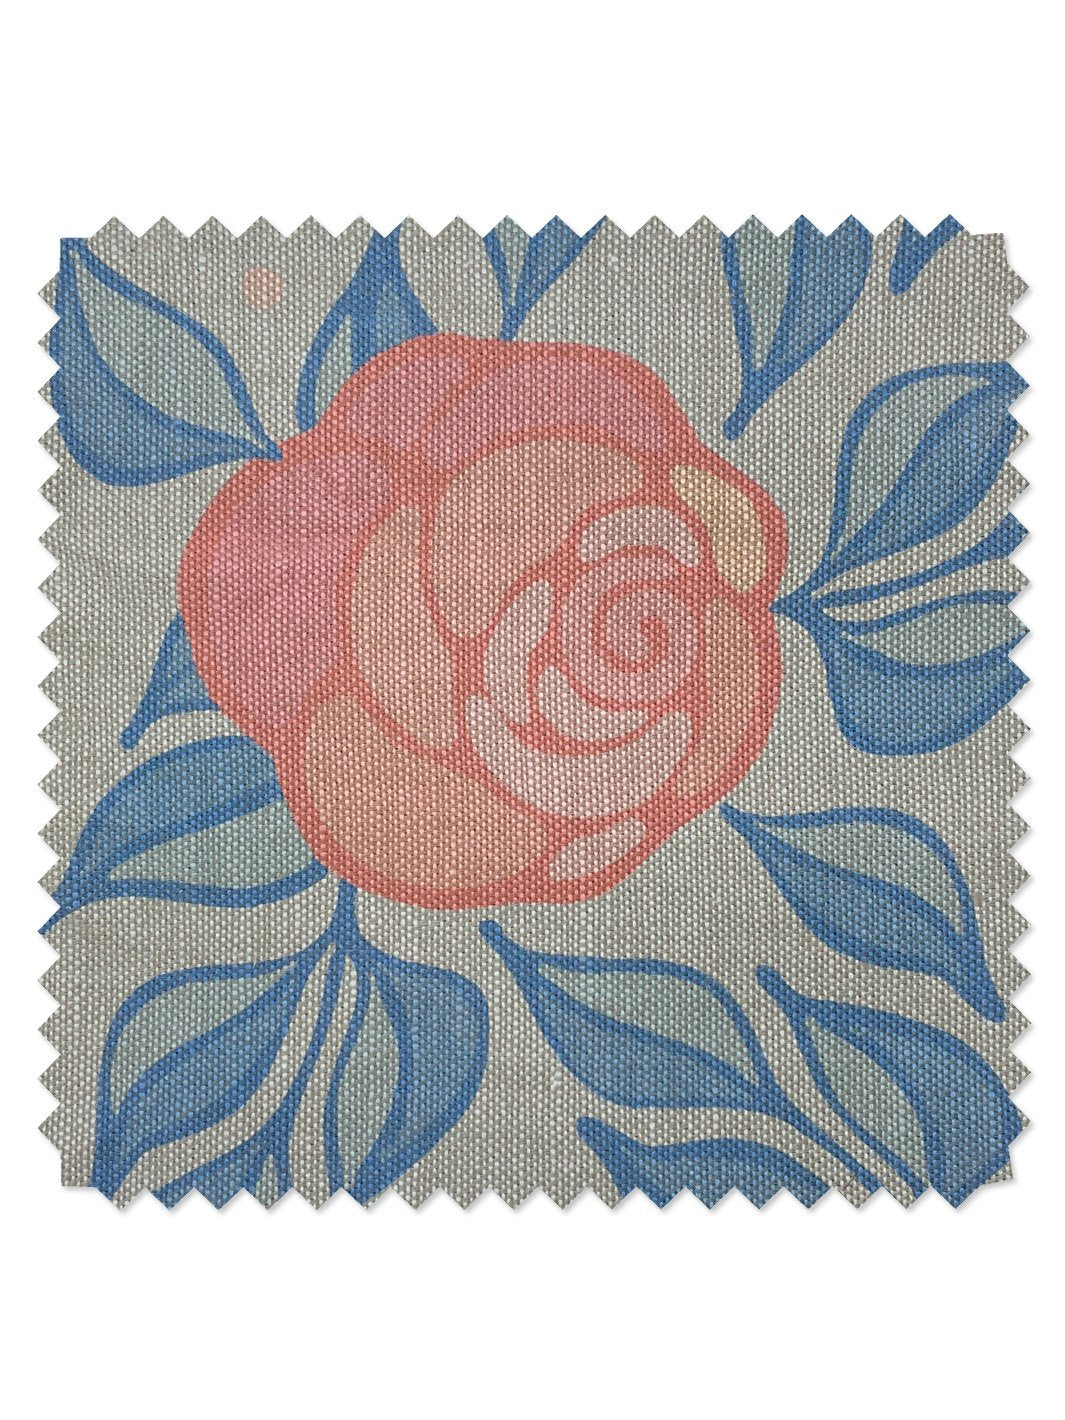 'Fabric by the Yard - Groovy Floral - Baby Blue on Flax Linen